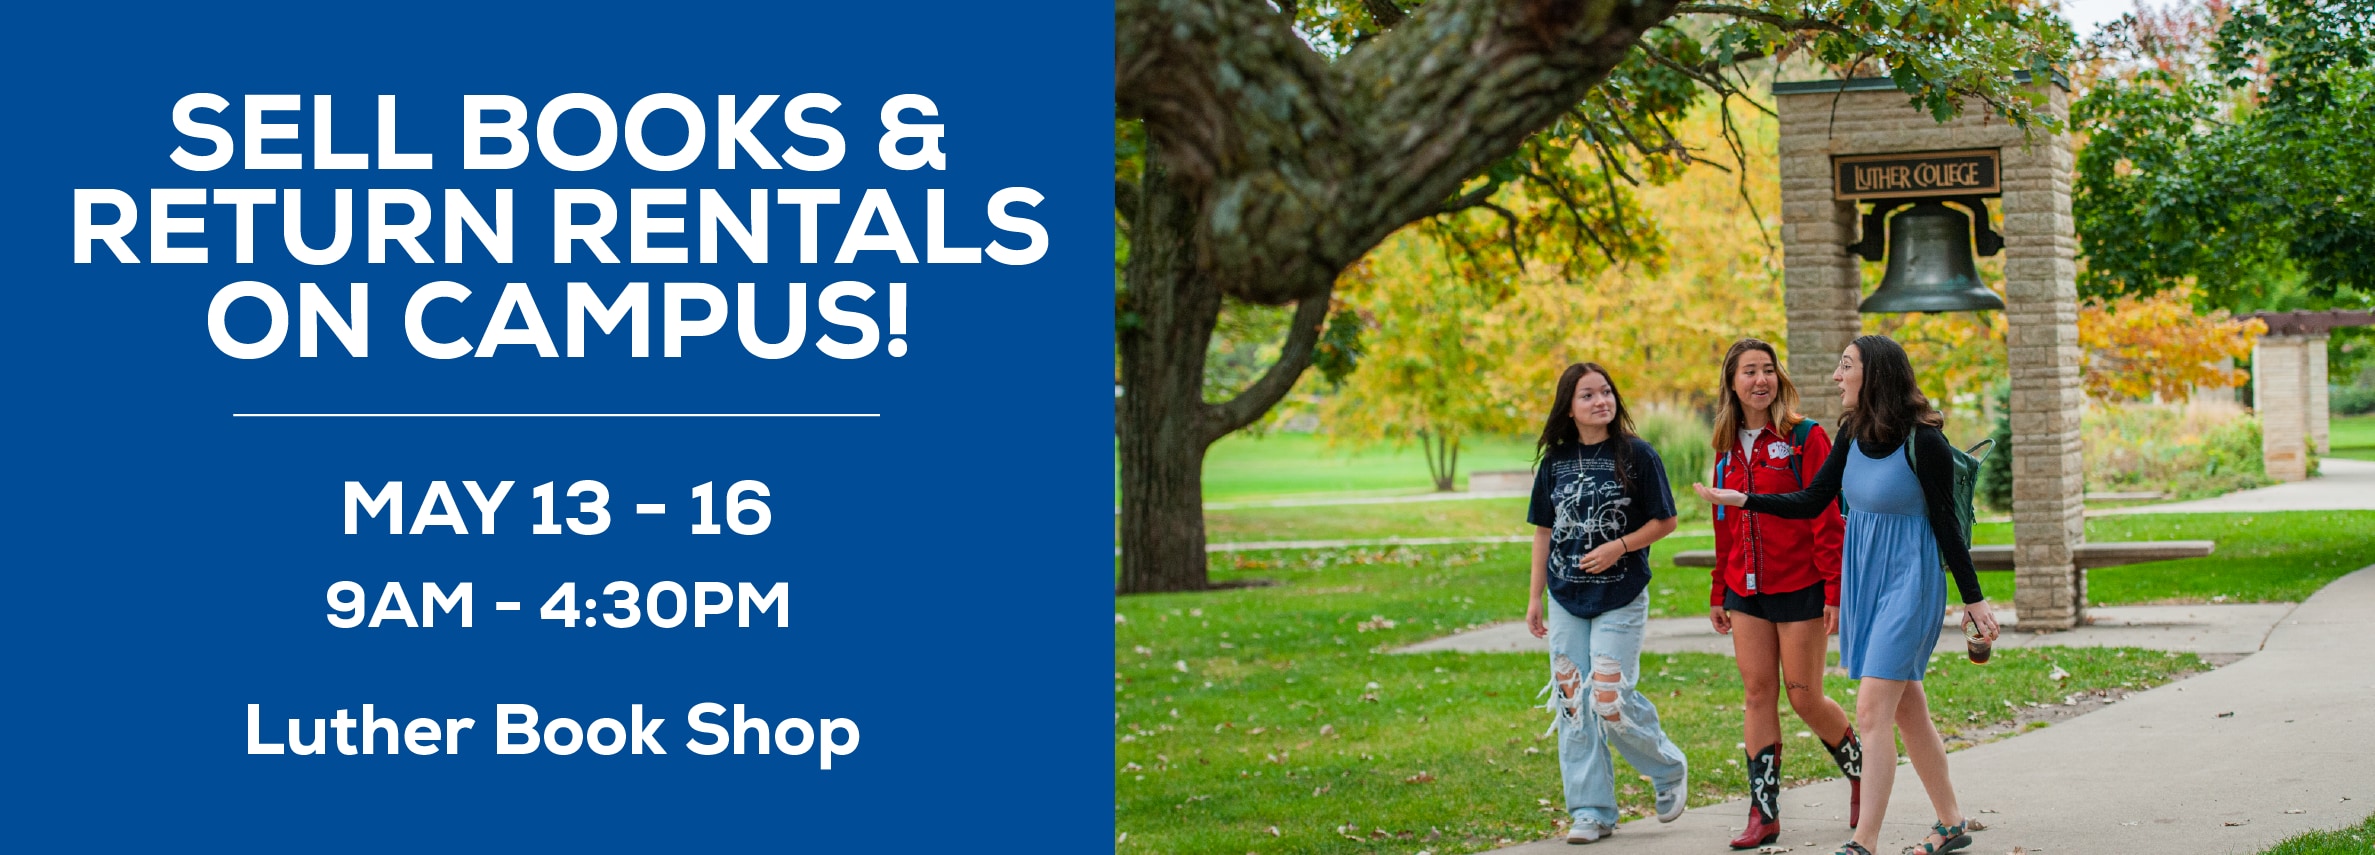 Sell books and return rentals on campus! May 13 - 16. 9am to 4:30pm at the Luther Book Shop.